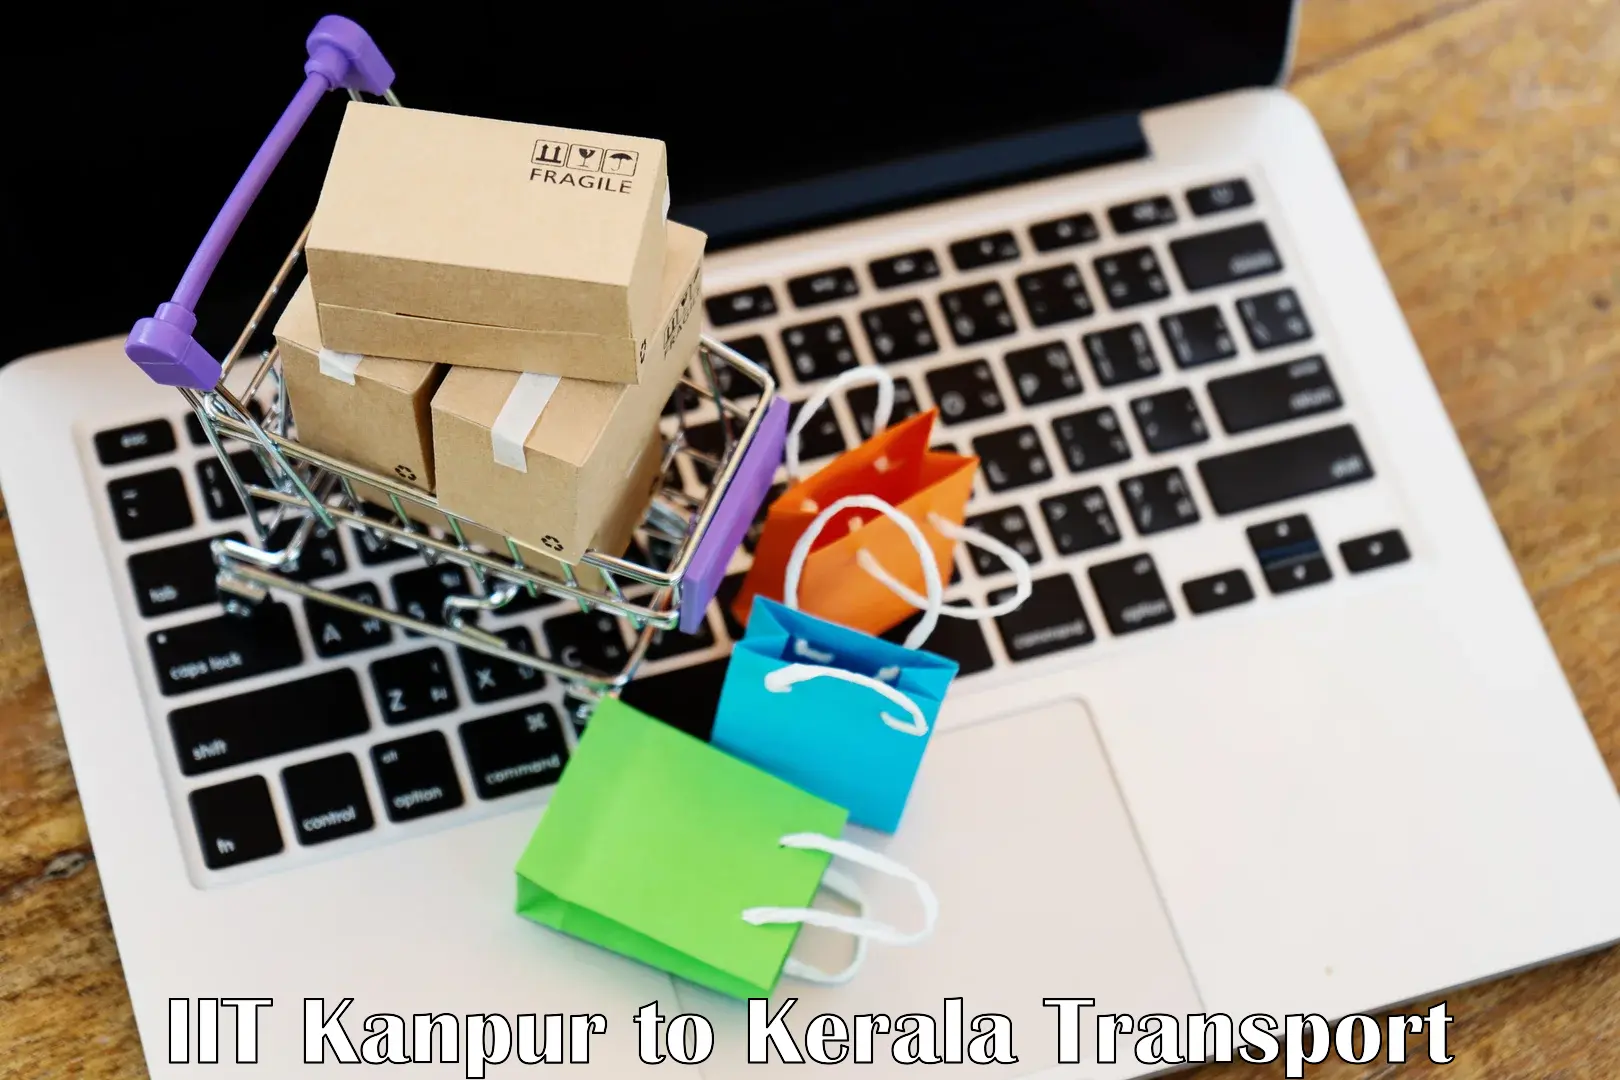 Two wheeler parcel service IIT Kanpur to Chalakudy